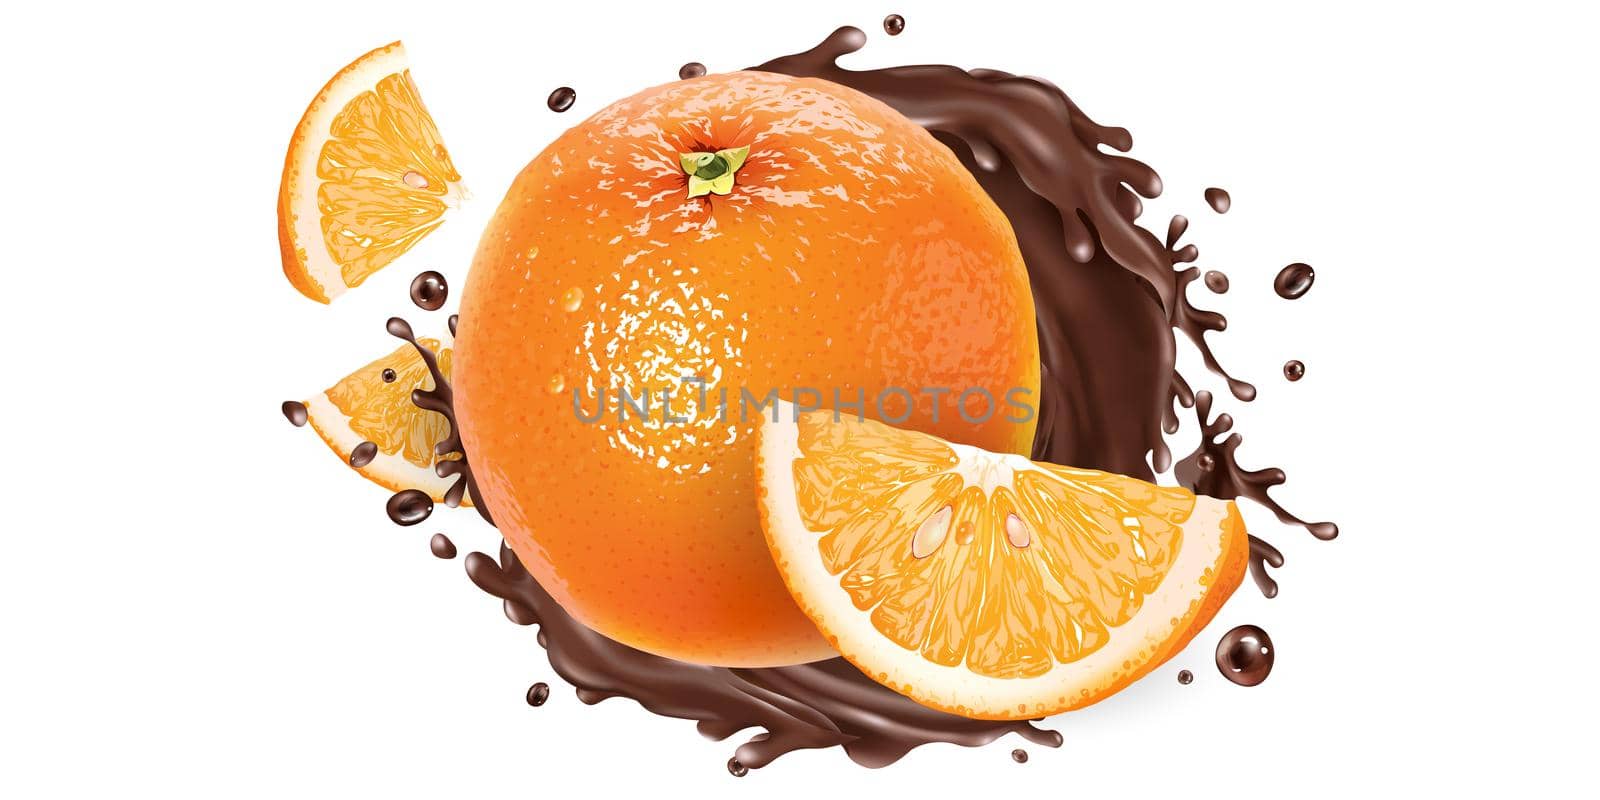 Whole and sliced oranges in a chocolate splash. by ConceptCafe